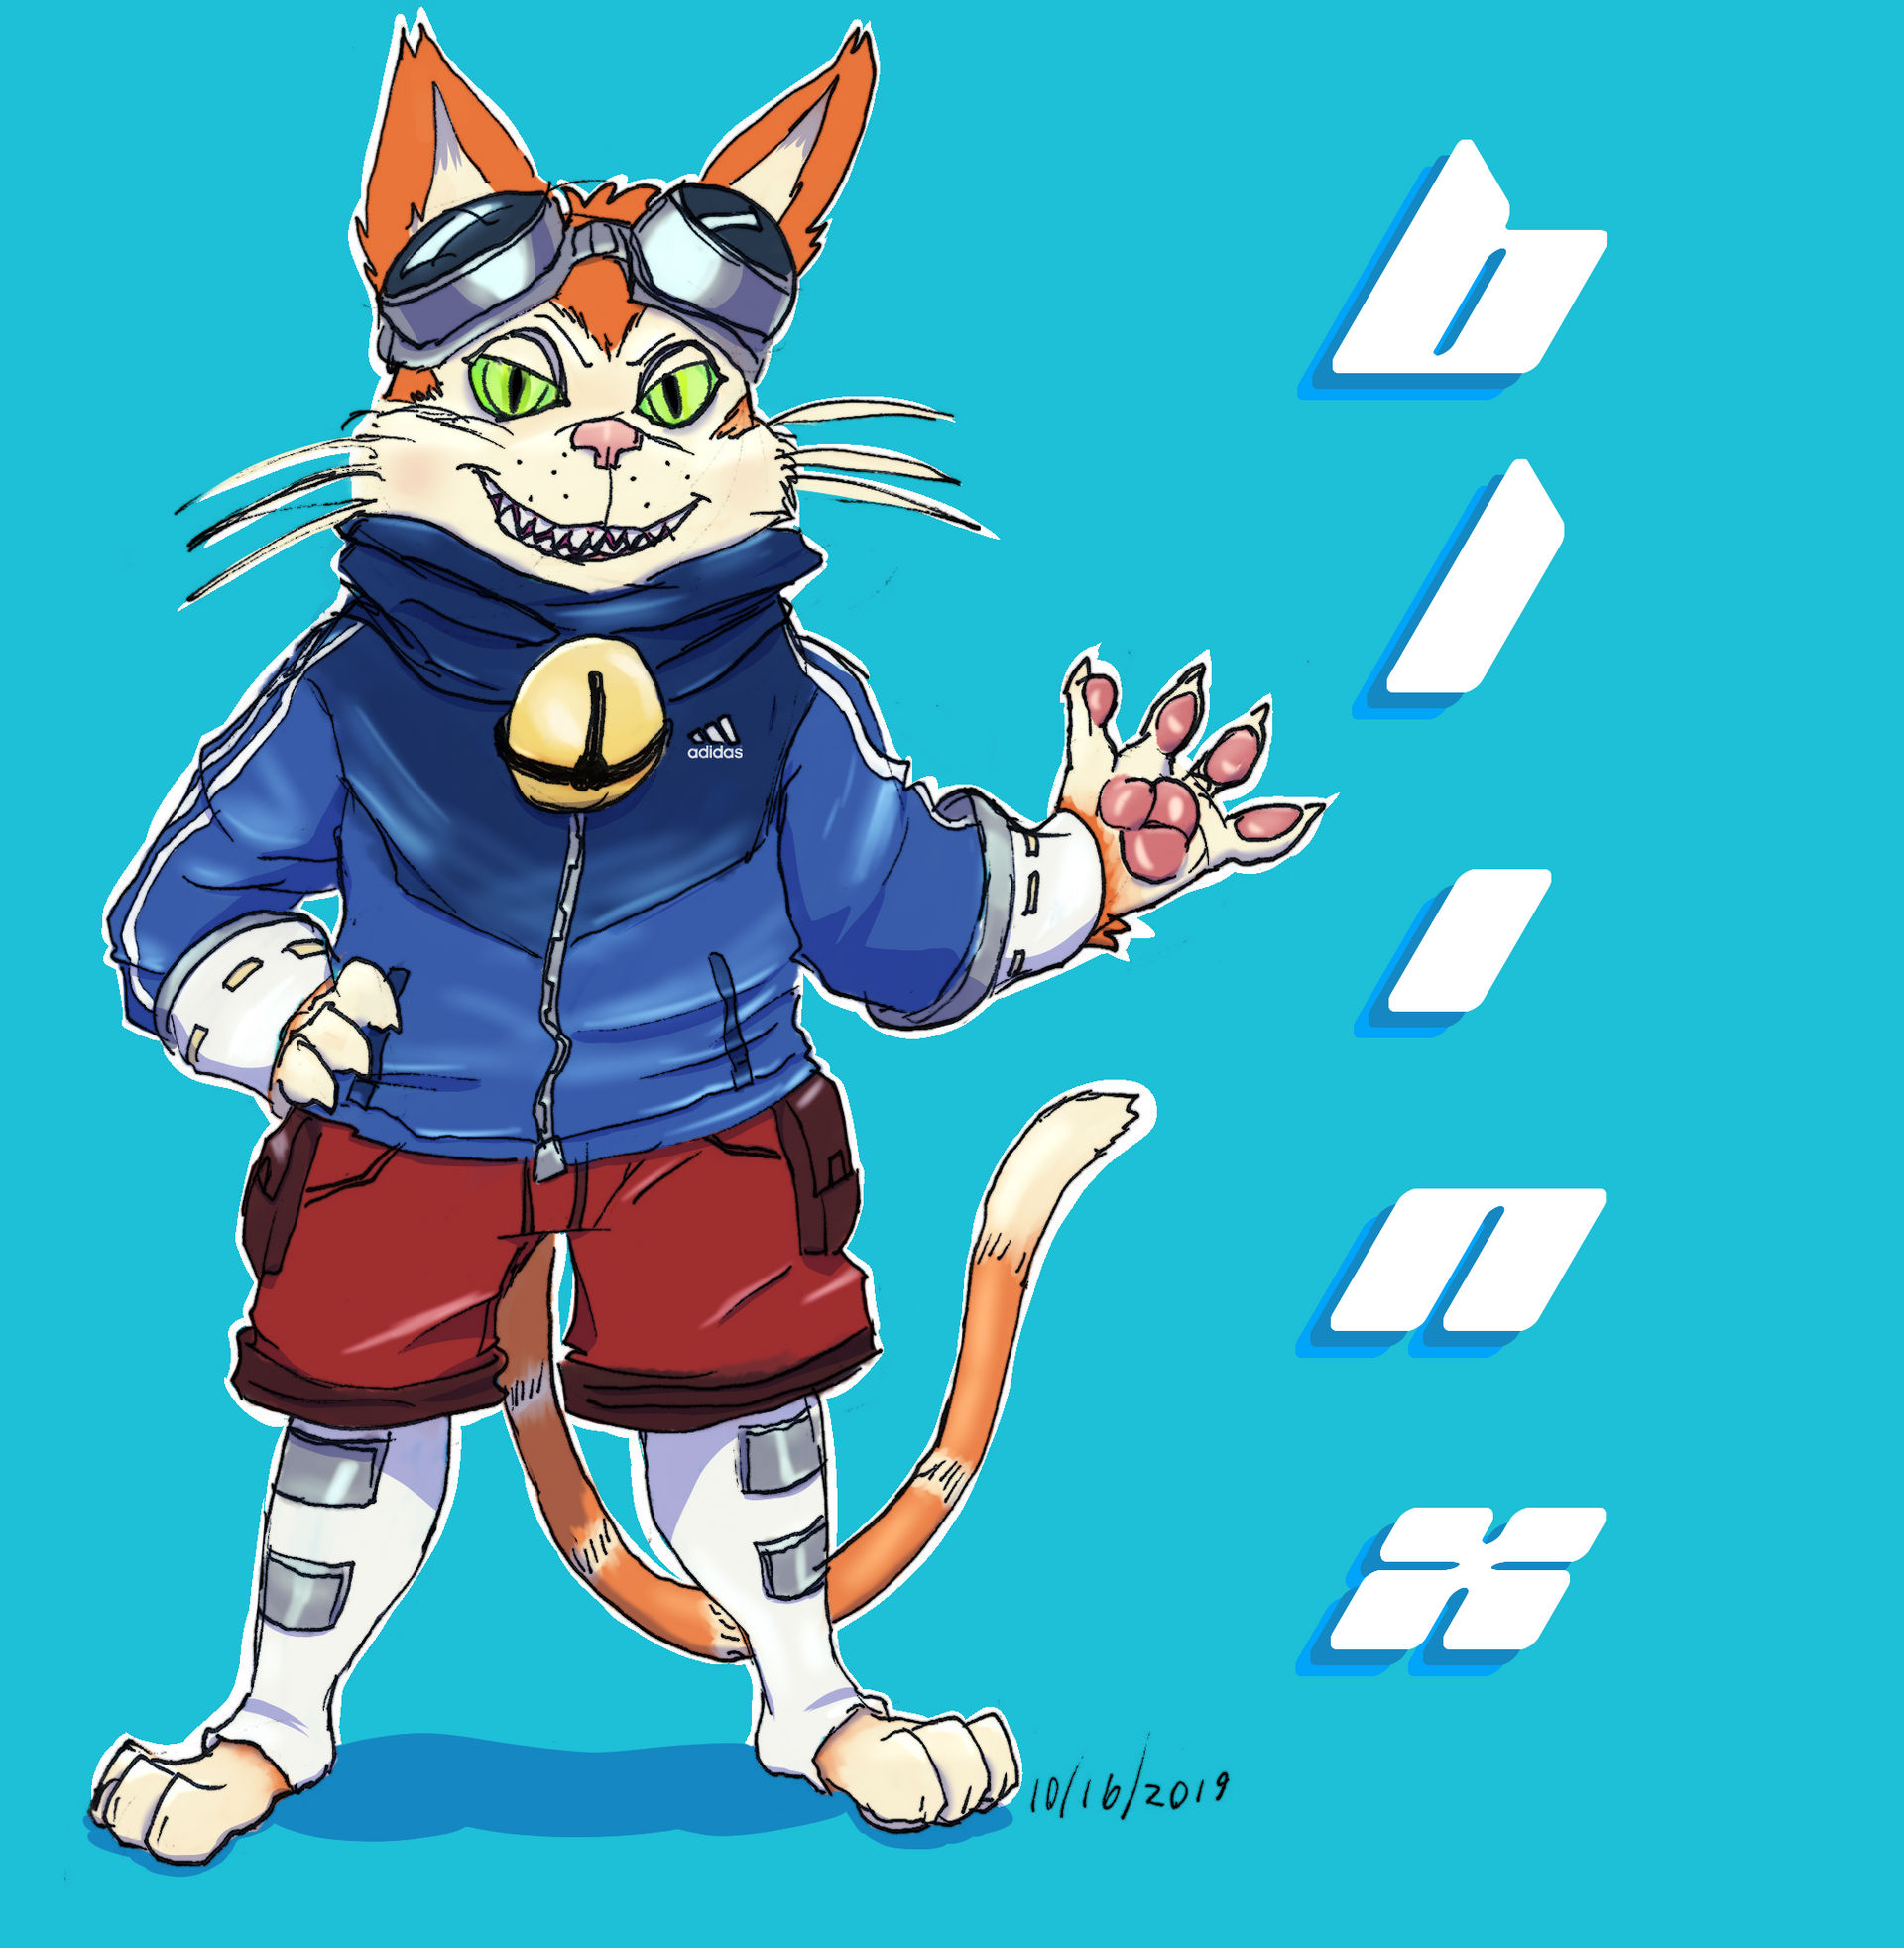 Blinx the Timesweeper